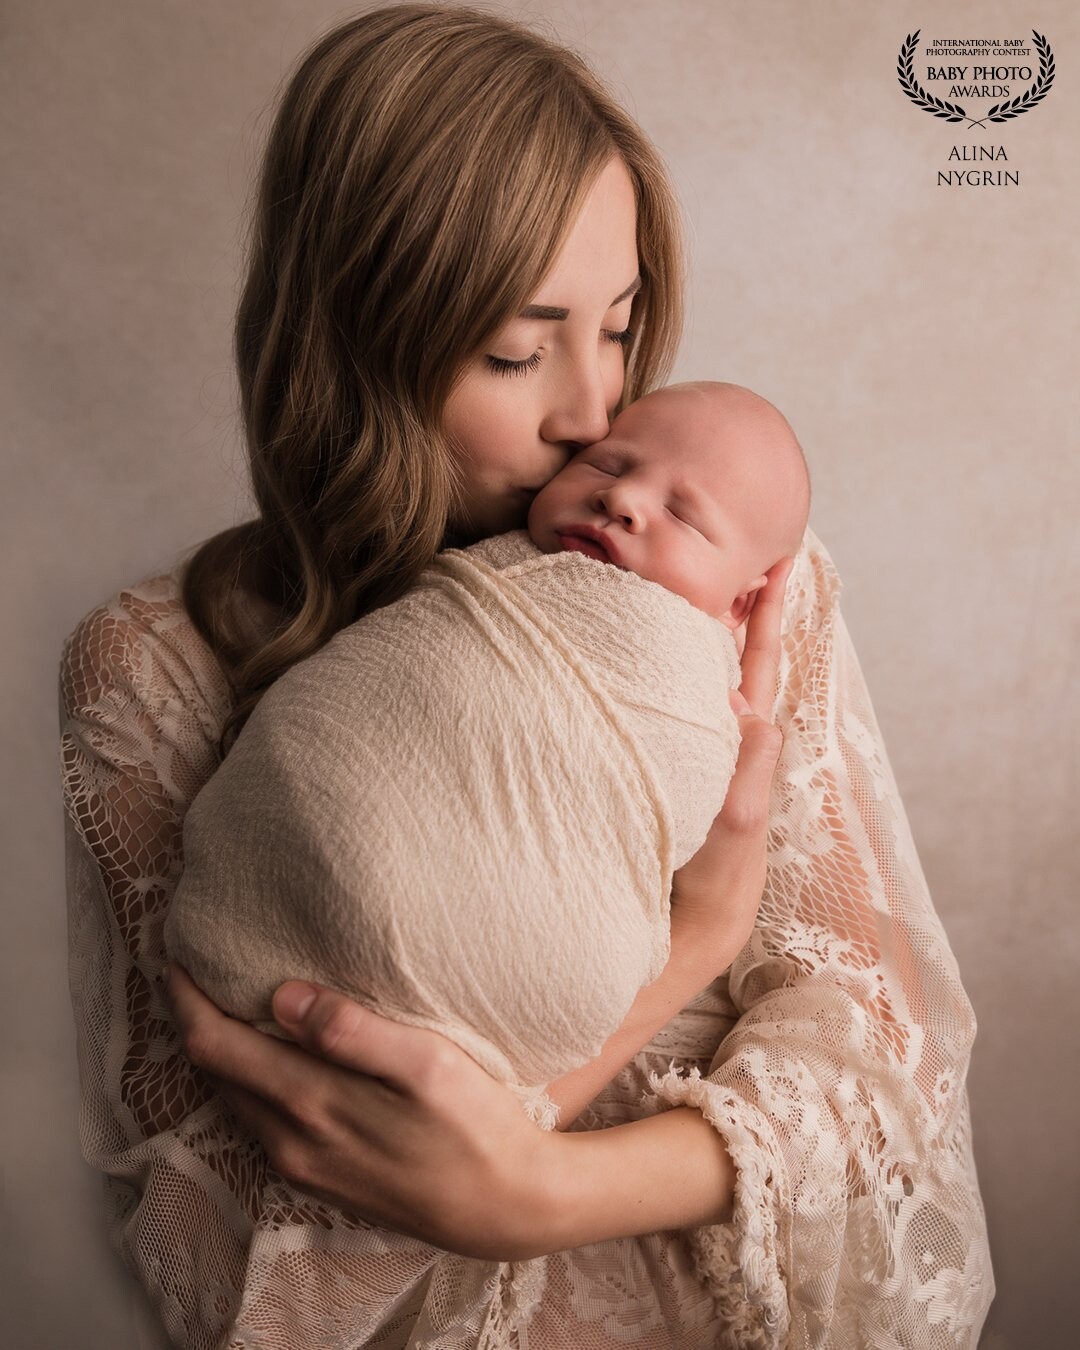 A photo shoot has never been booked so suddenly, booked on Friday and on Saturday I went to the family. The Mom opened the door for me while she was breastfeeding, I love visiting families at home and capturing the intimate moments between parents and baby.